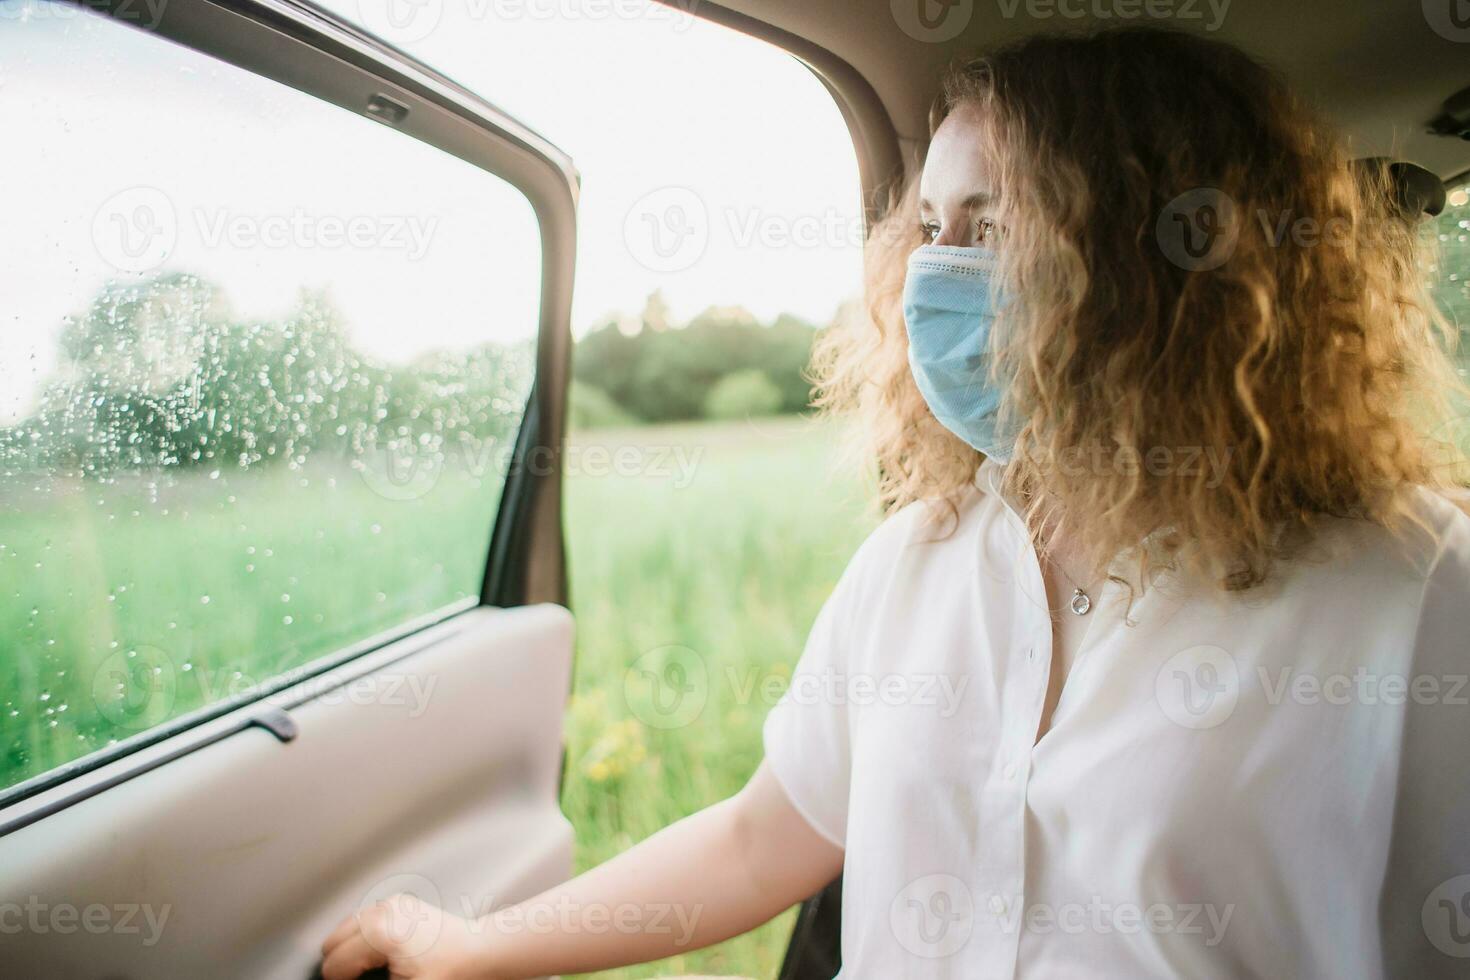 Stylish young carly woman in medical mask looking out window while sitting on back seat of car on blurred background with sunset photo